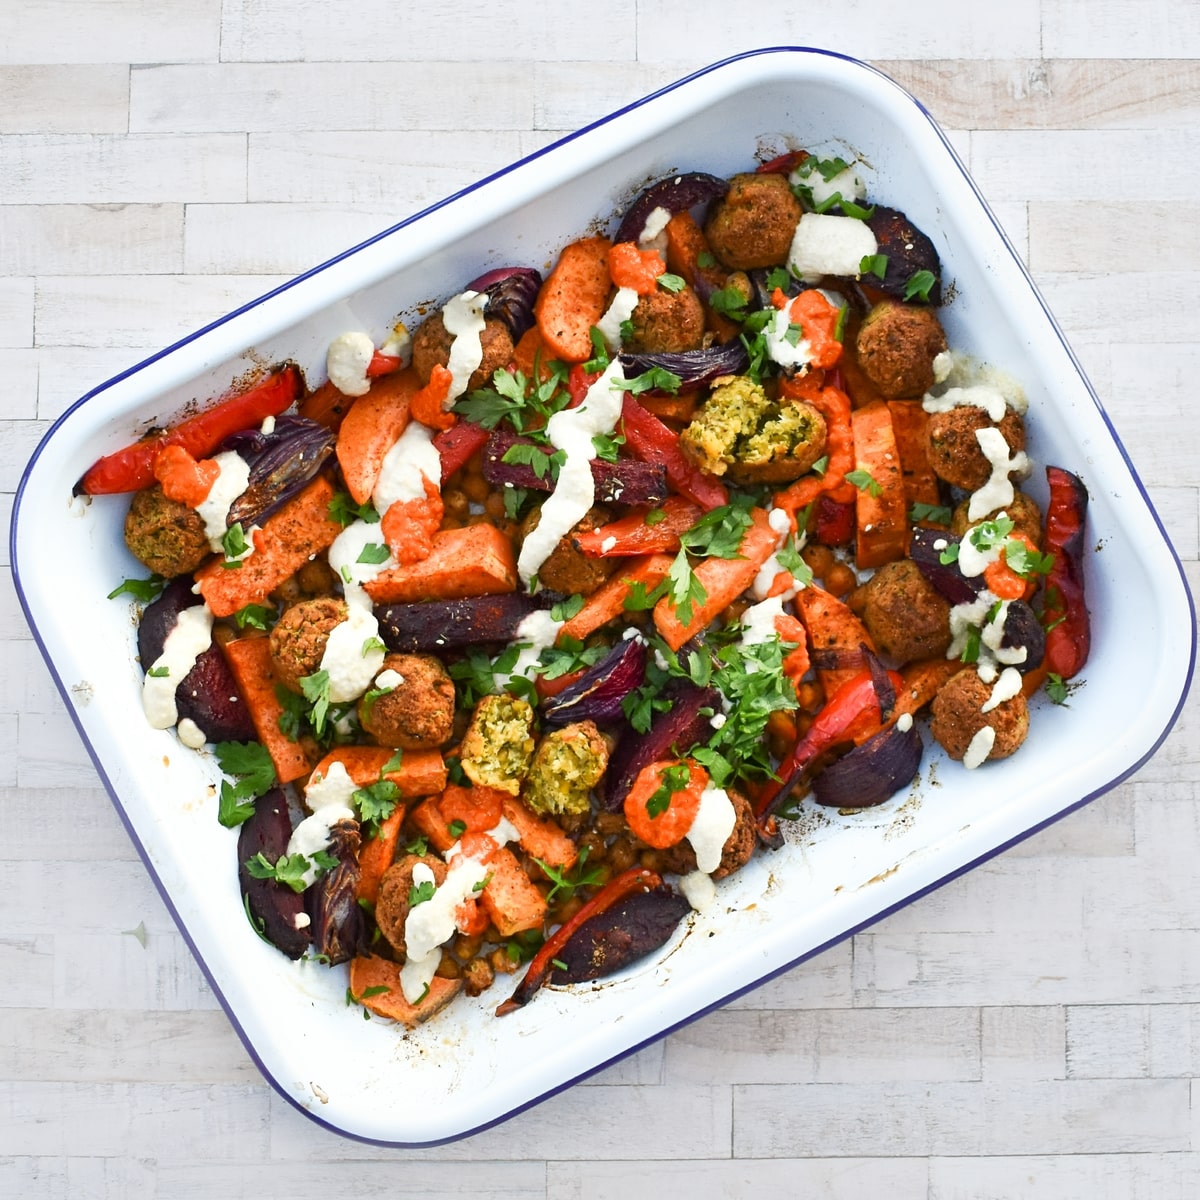 Sweet potato bake topped with hummus, red pepper paste & fresh herbs.